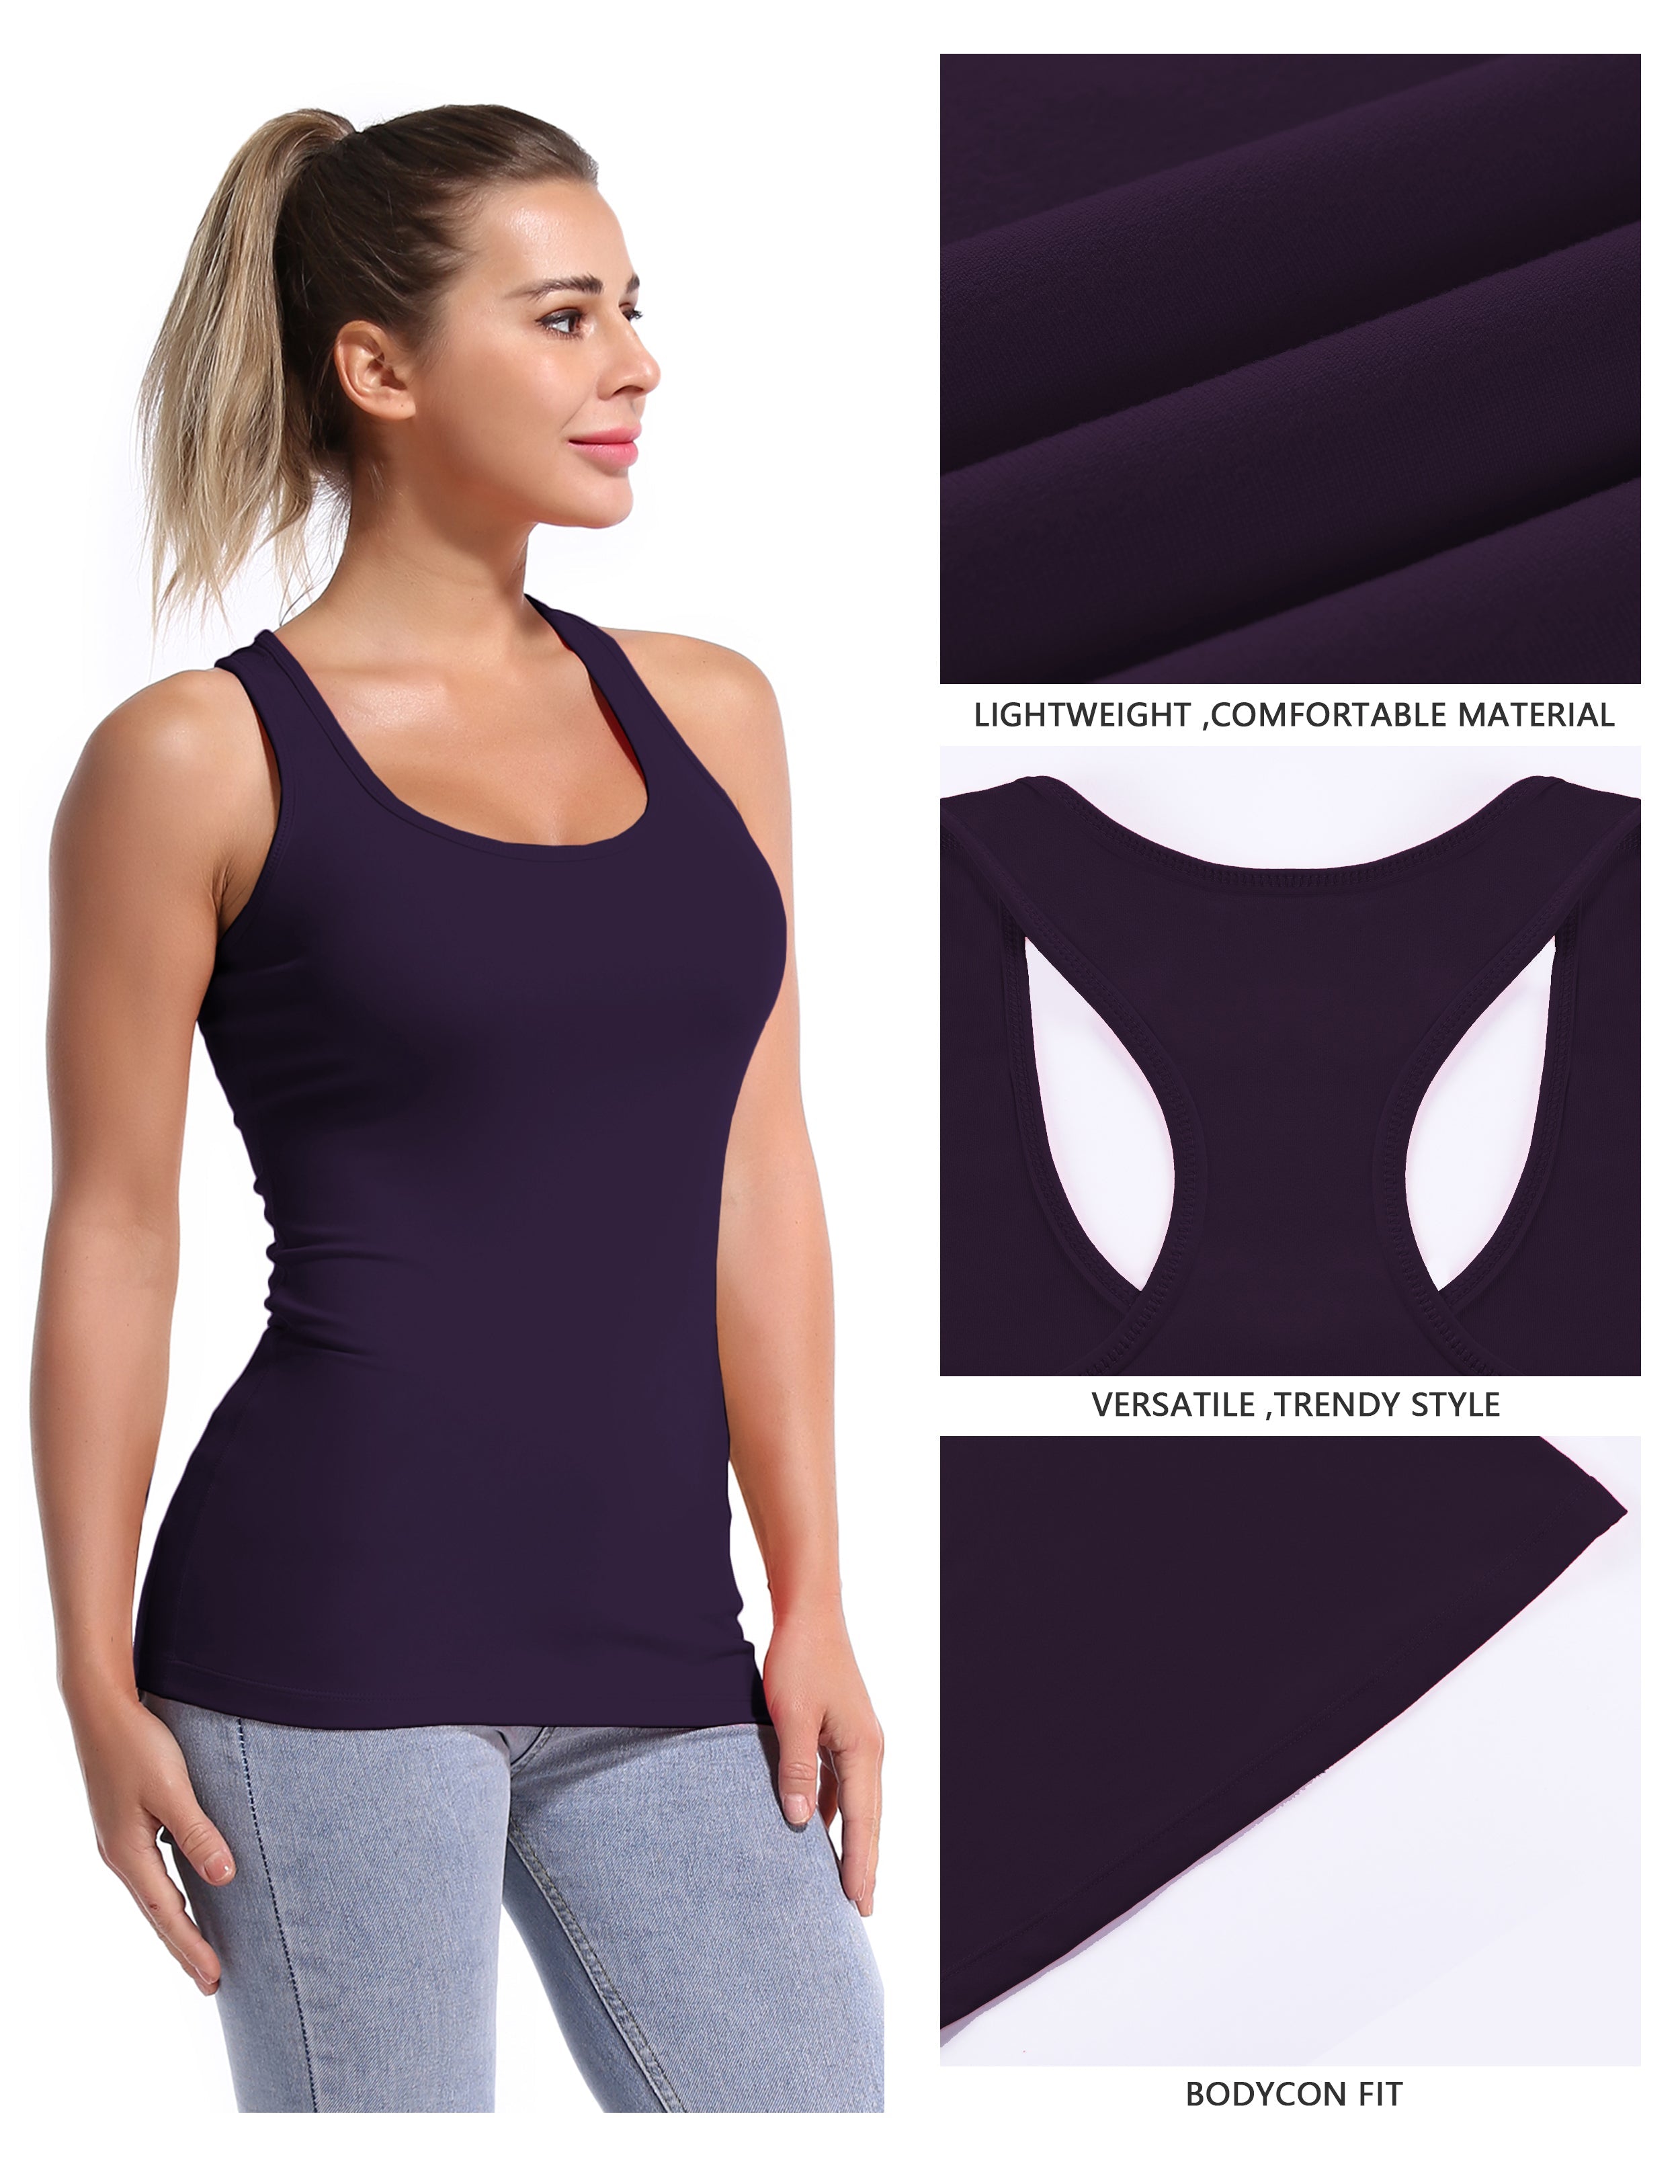 Racerback Athletic Tank Tops midnightblue 92%Nylon/8%Spandex(Cotton Soft) Designed for Running Tight Fit So buttery soft, it feels weightless Sweat-wicking Four-way stretch Breathable Contours your body Sits below the waistband for moderate, everyday coverage